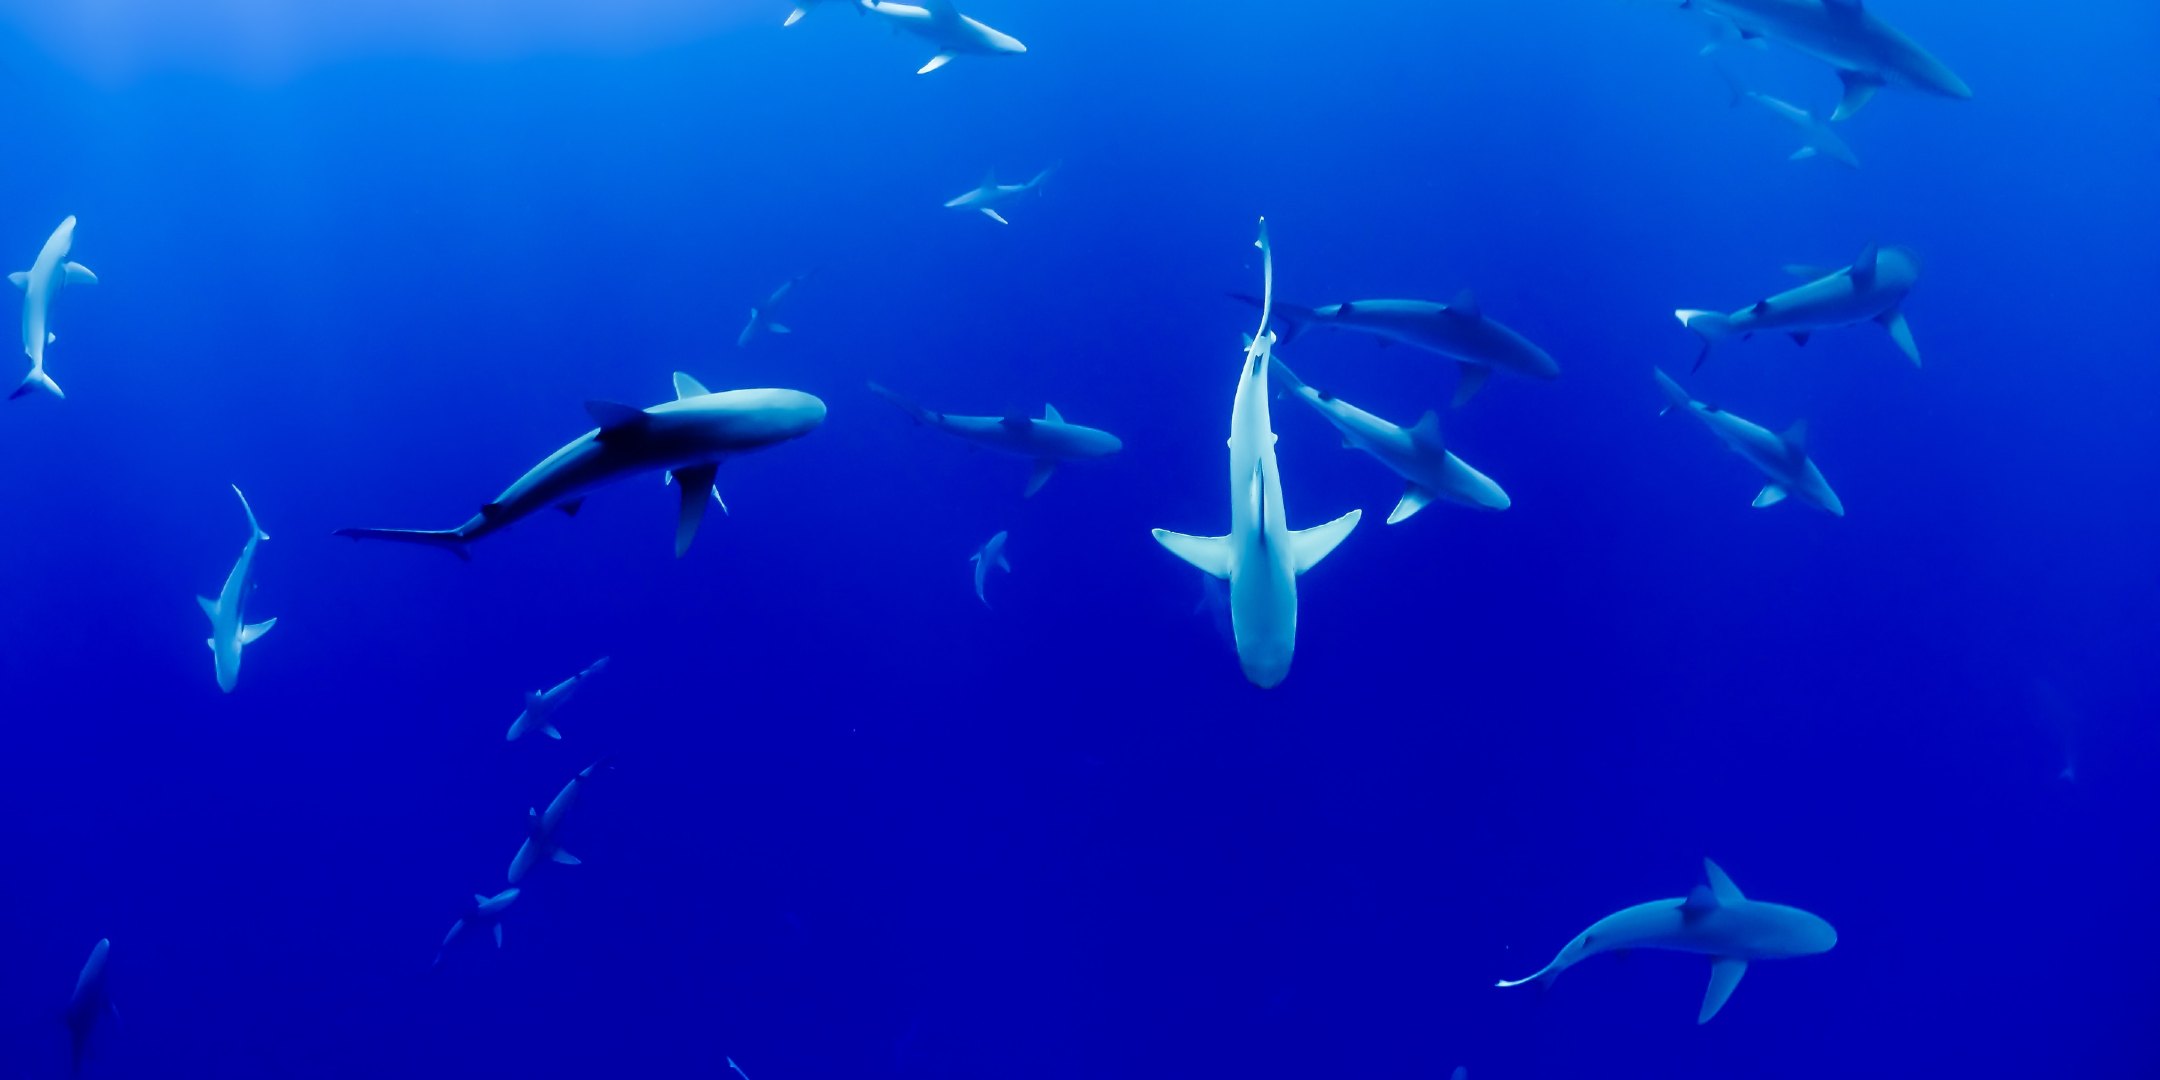 Photograph showing a number of sharks in the ocean